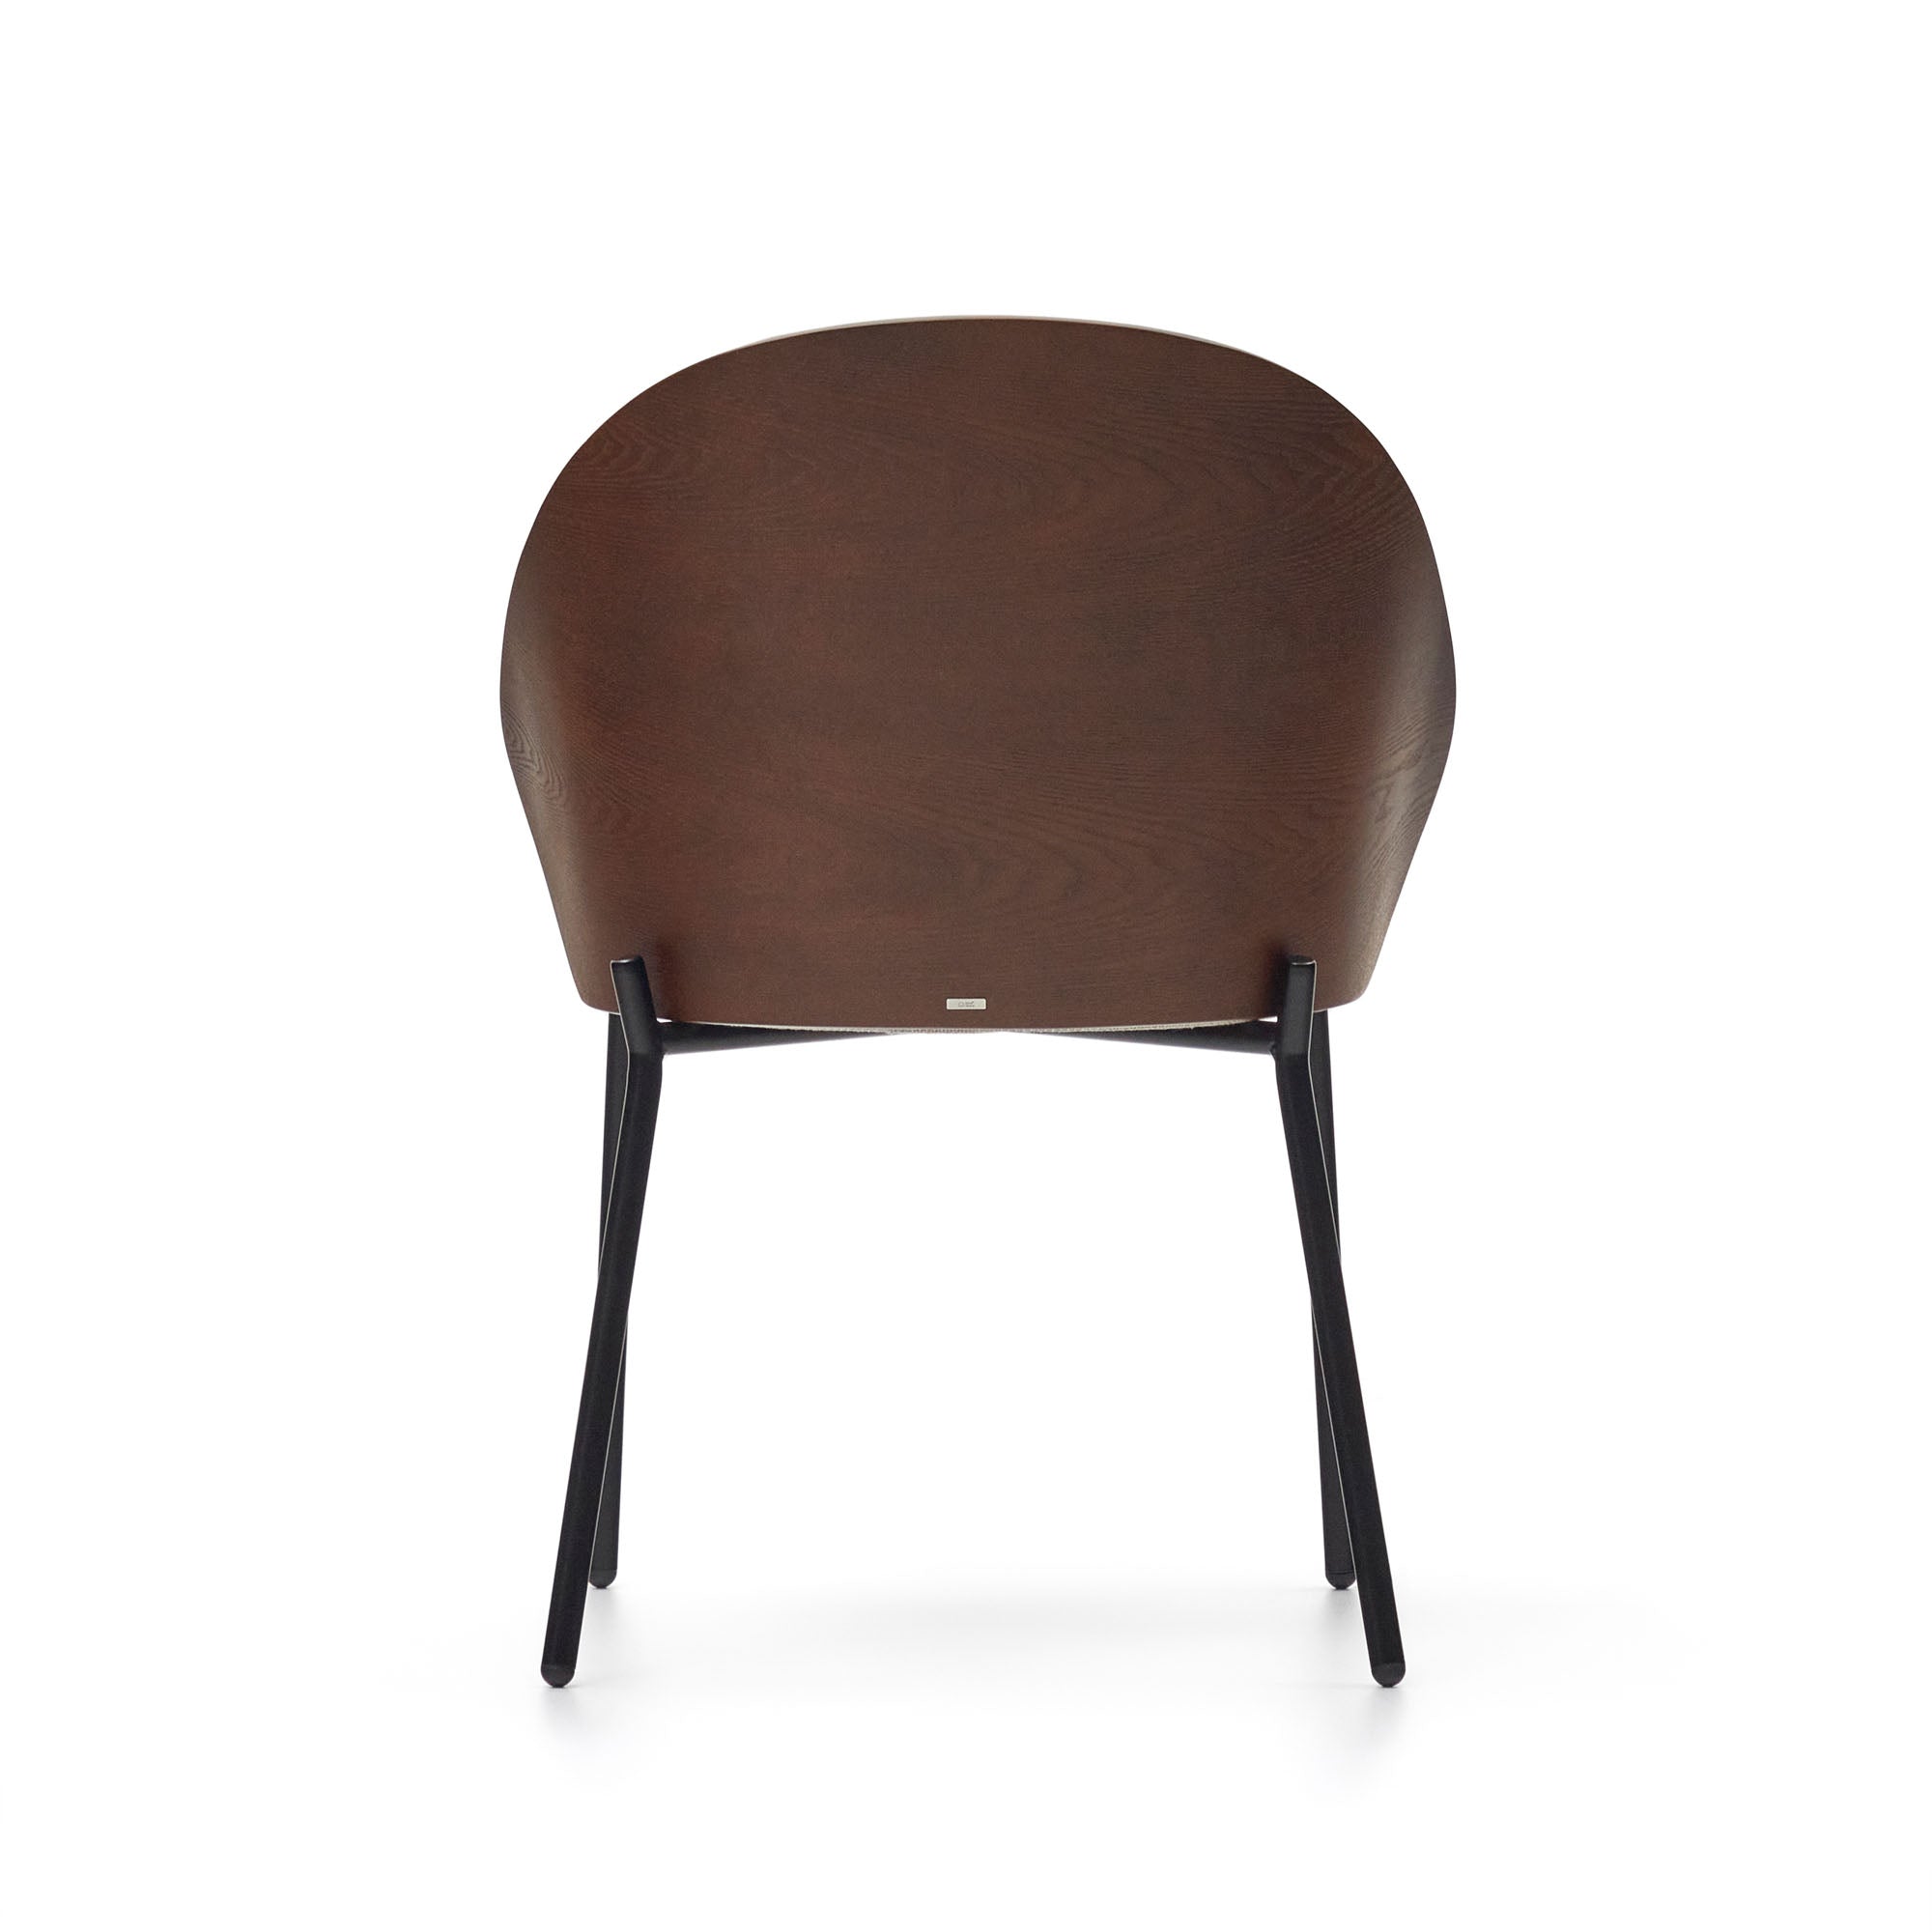 Eamy light brown chair in an ash wood veneer with a wenge finish and black metal